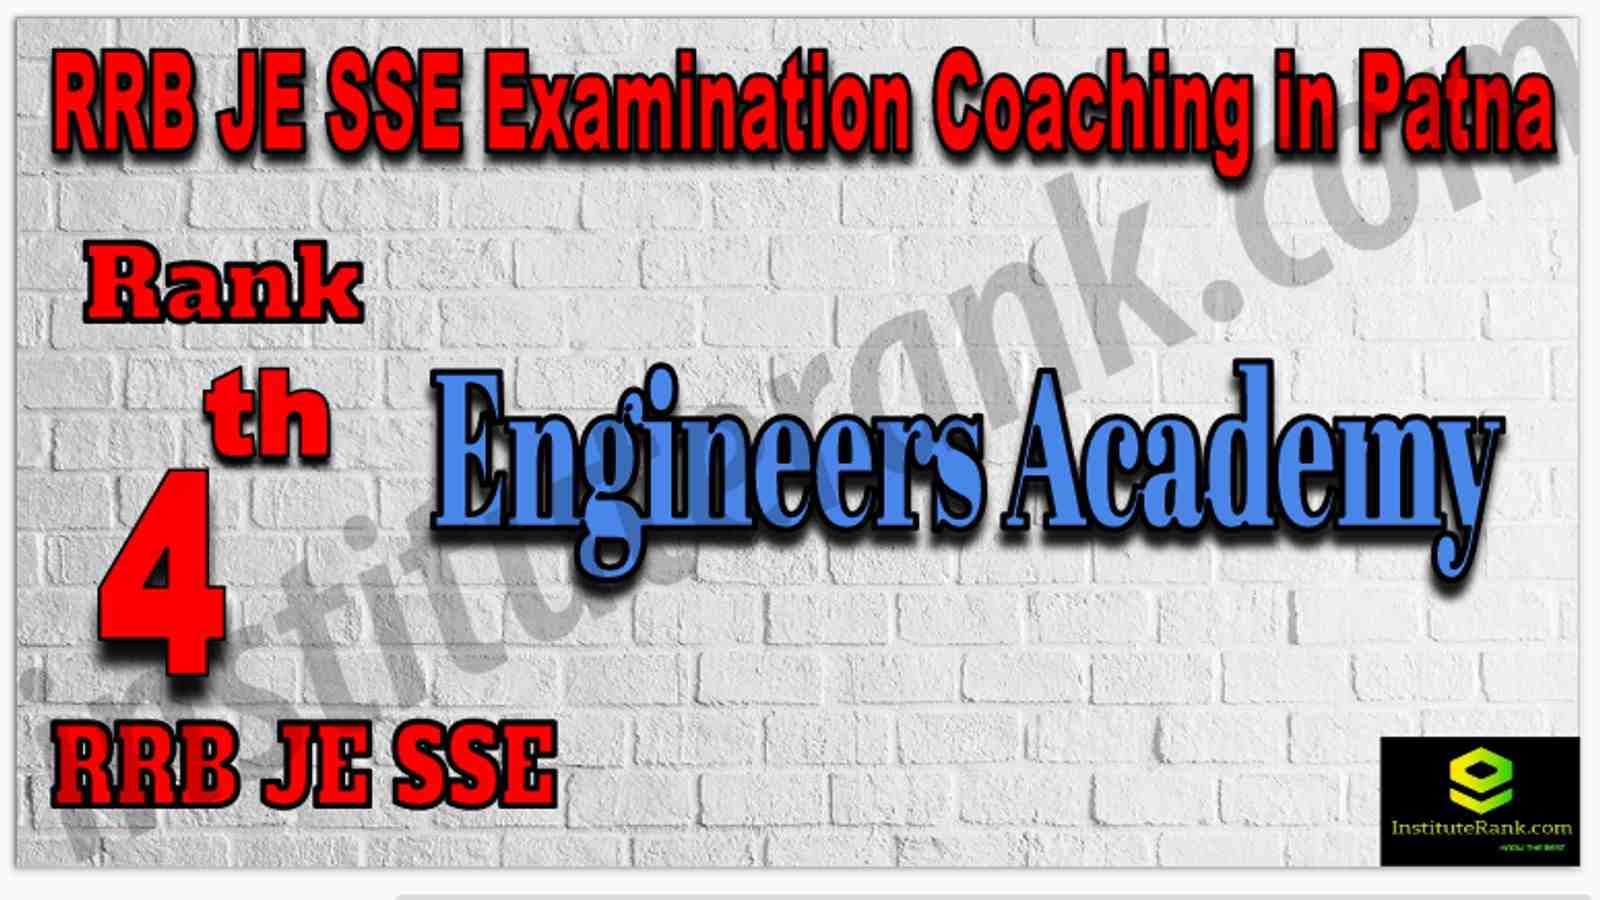 Rank 4th RRB JE SSE Examination Coaching Institute in Patna